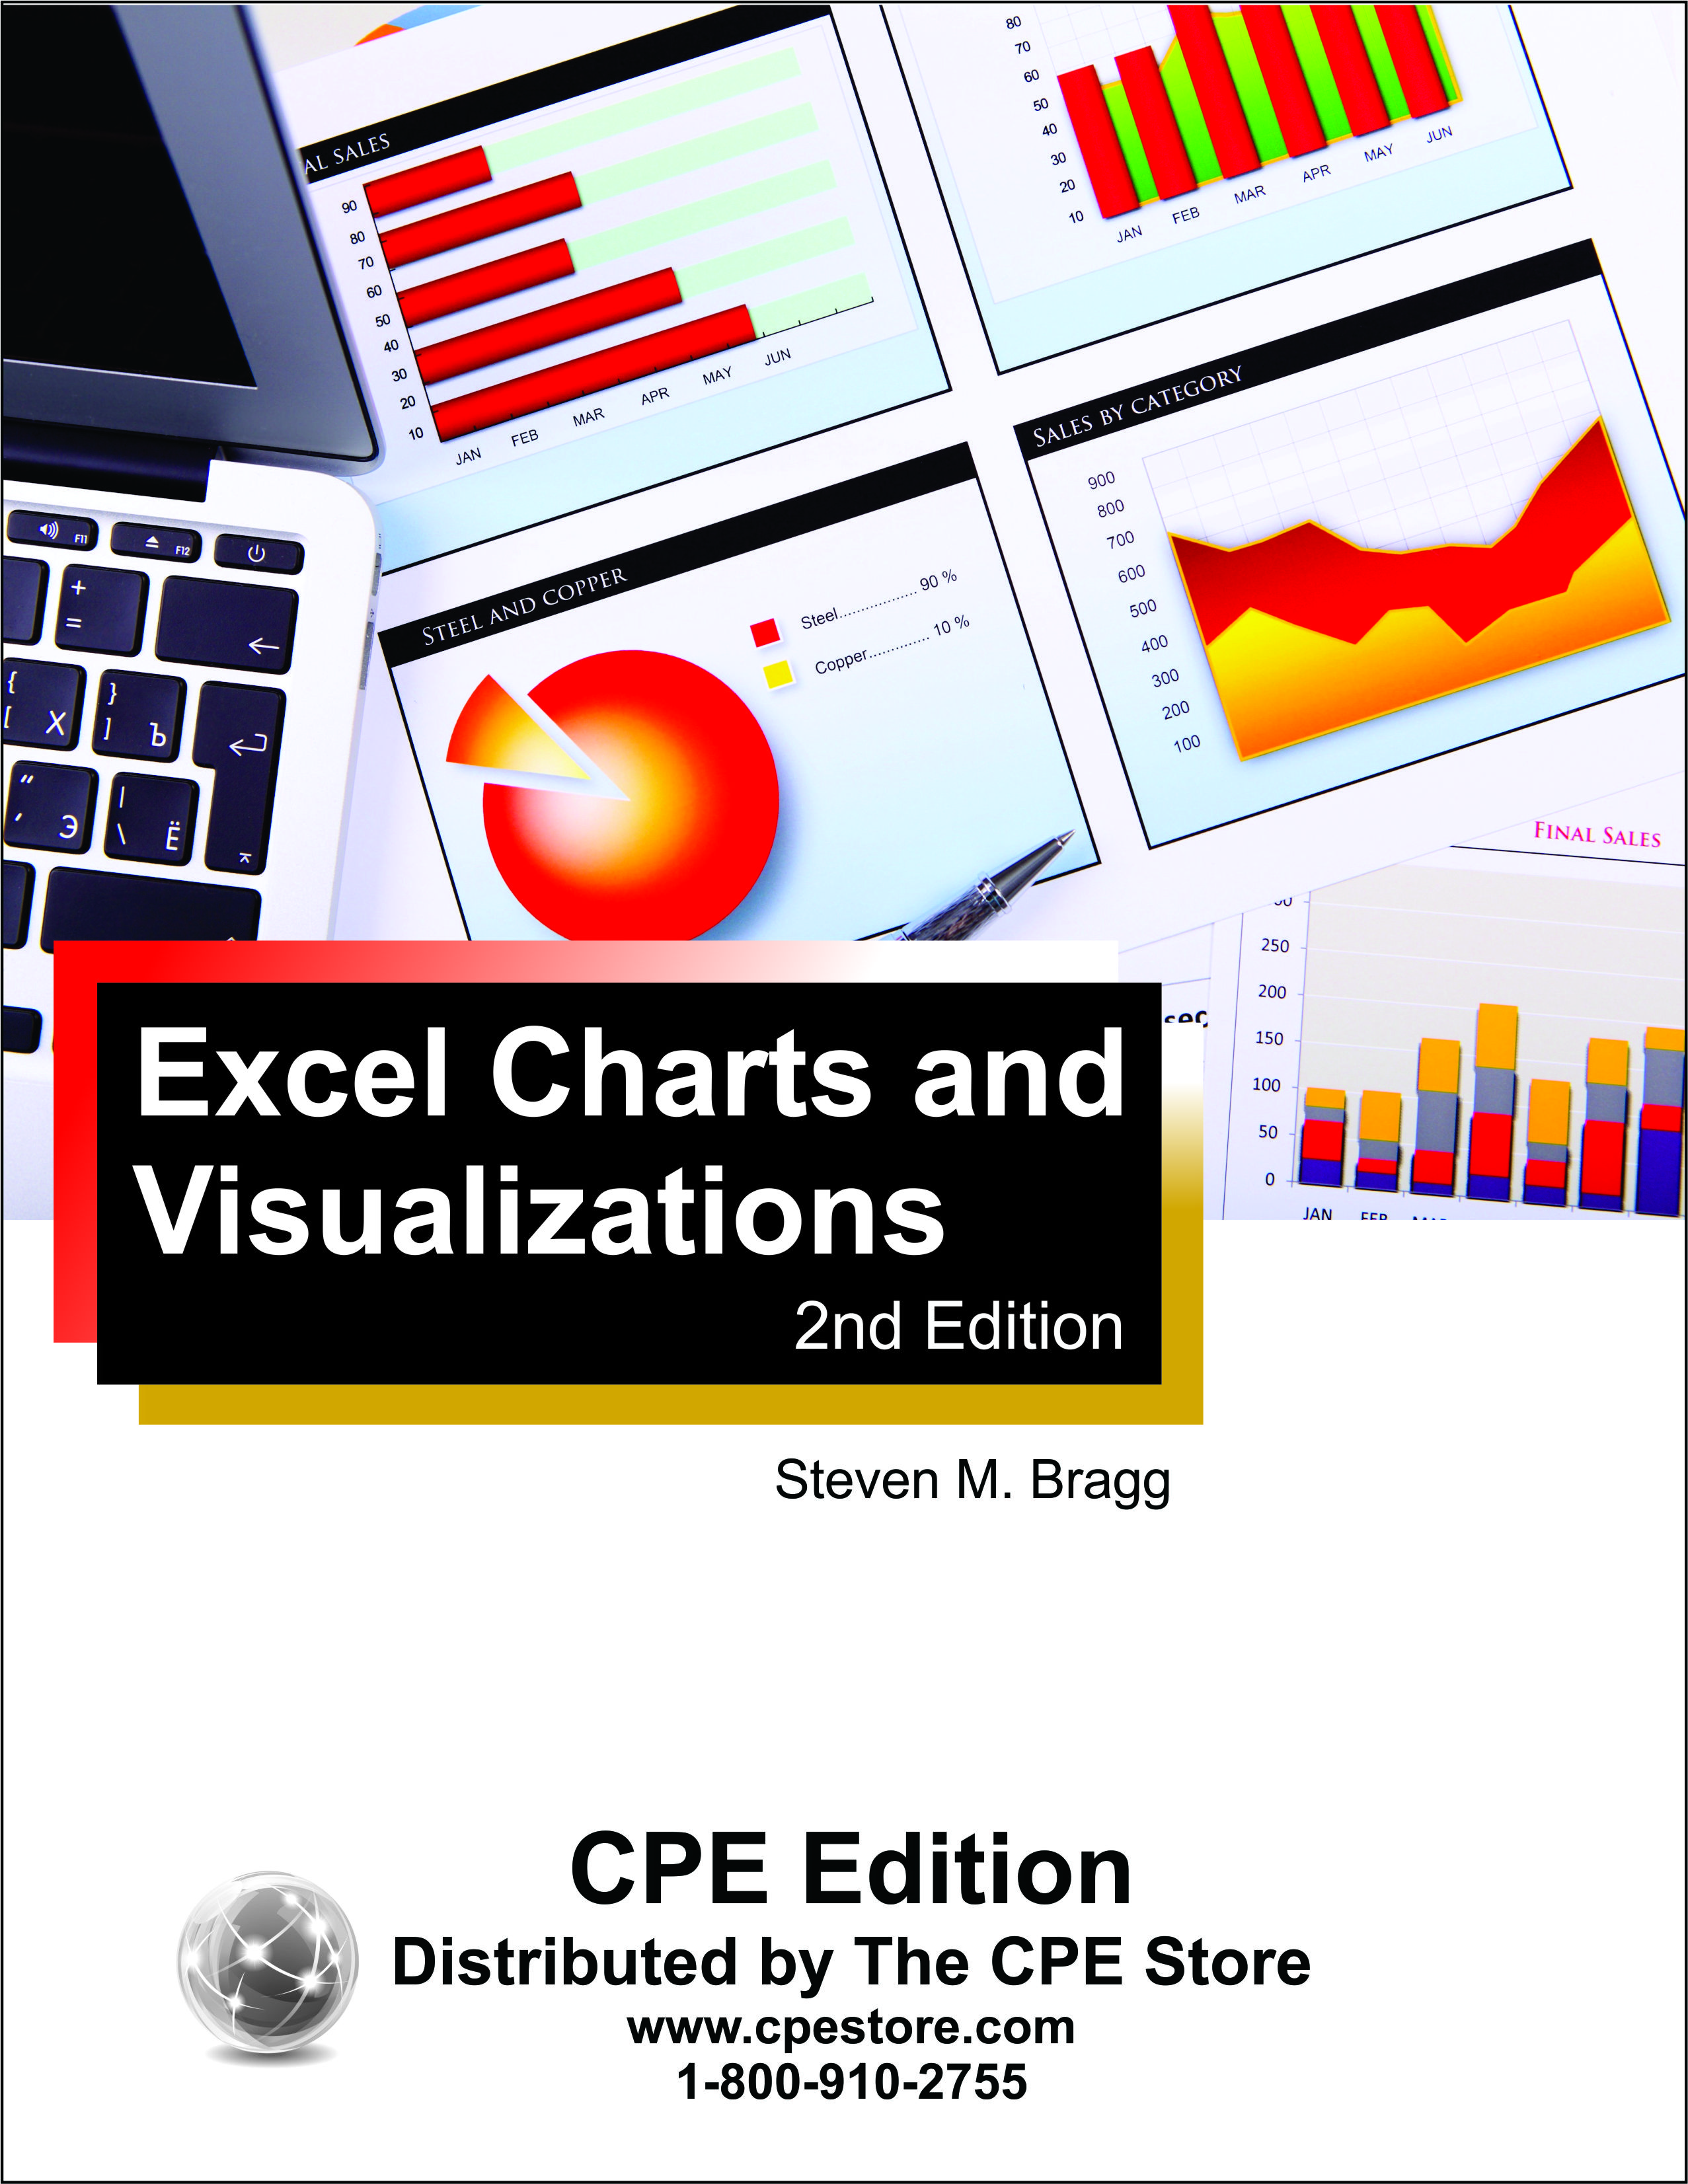 Excel Charts and Visualizations